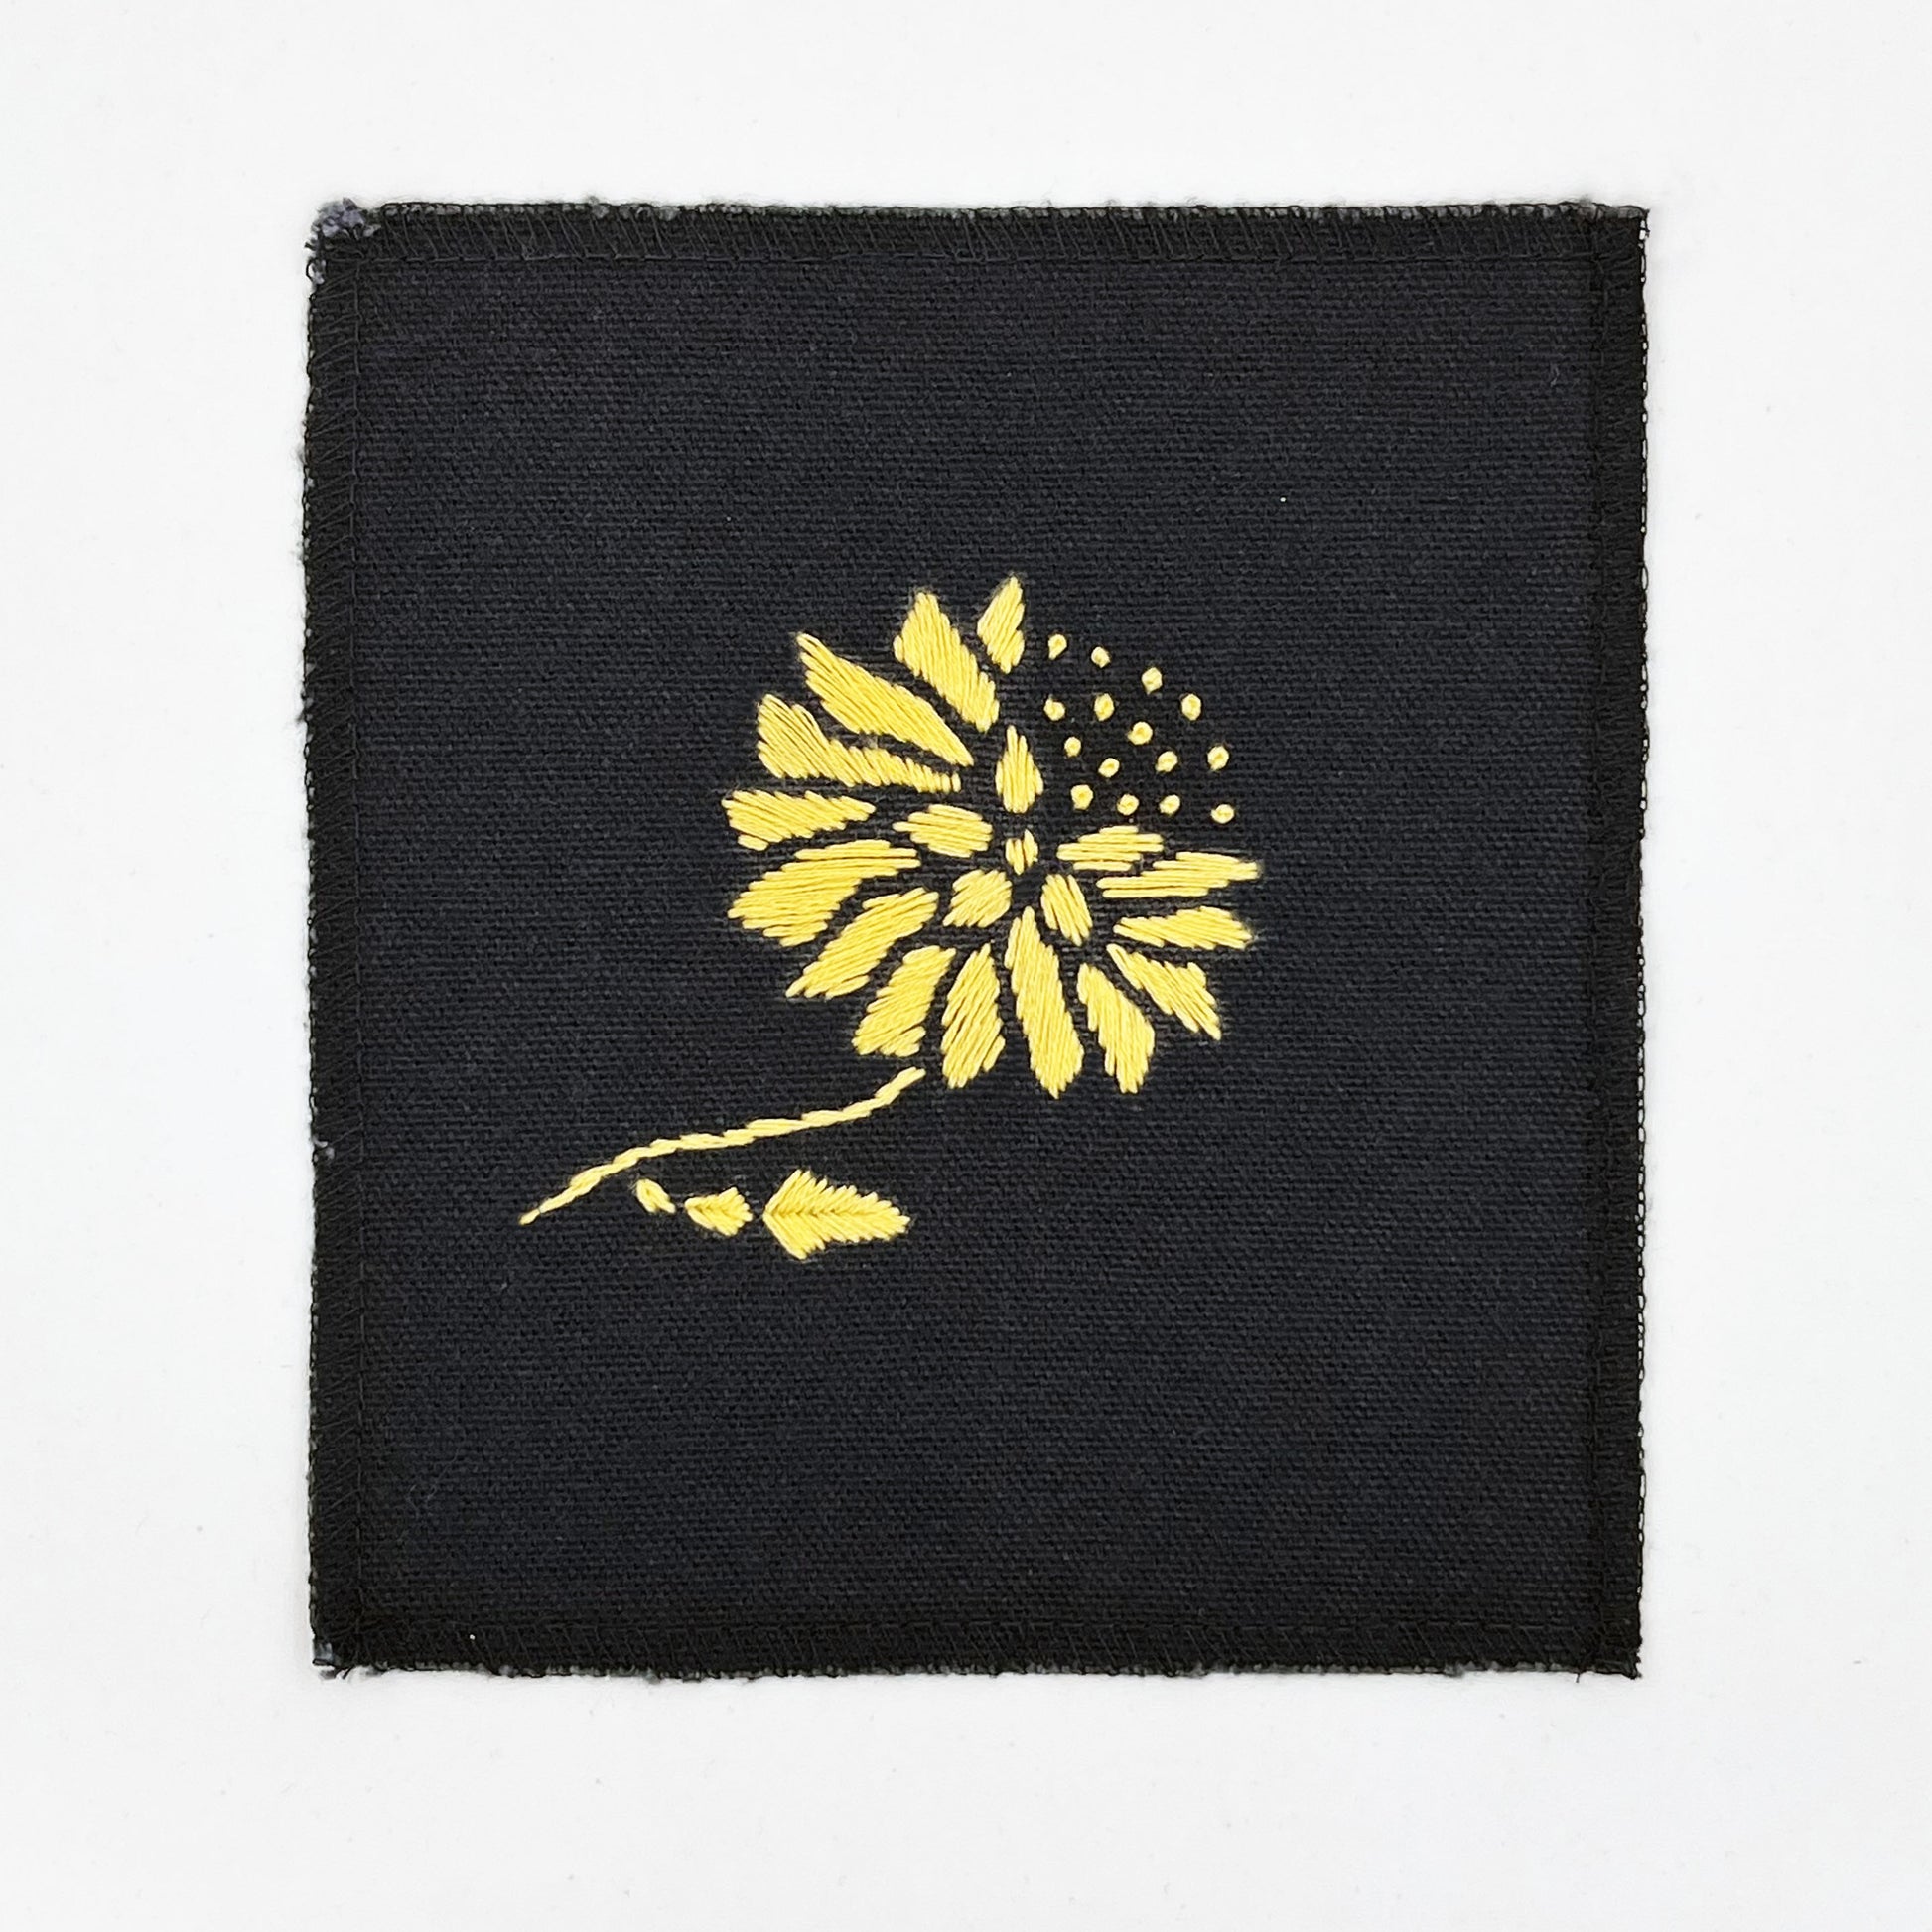 a square patch in black fabric, hand embroidered with a yellow gold colored abstract dandelion made mostly of petals, with a quarter of them replaced with french knots, with overlocked edges, on a white background